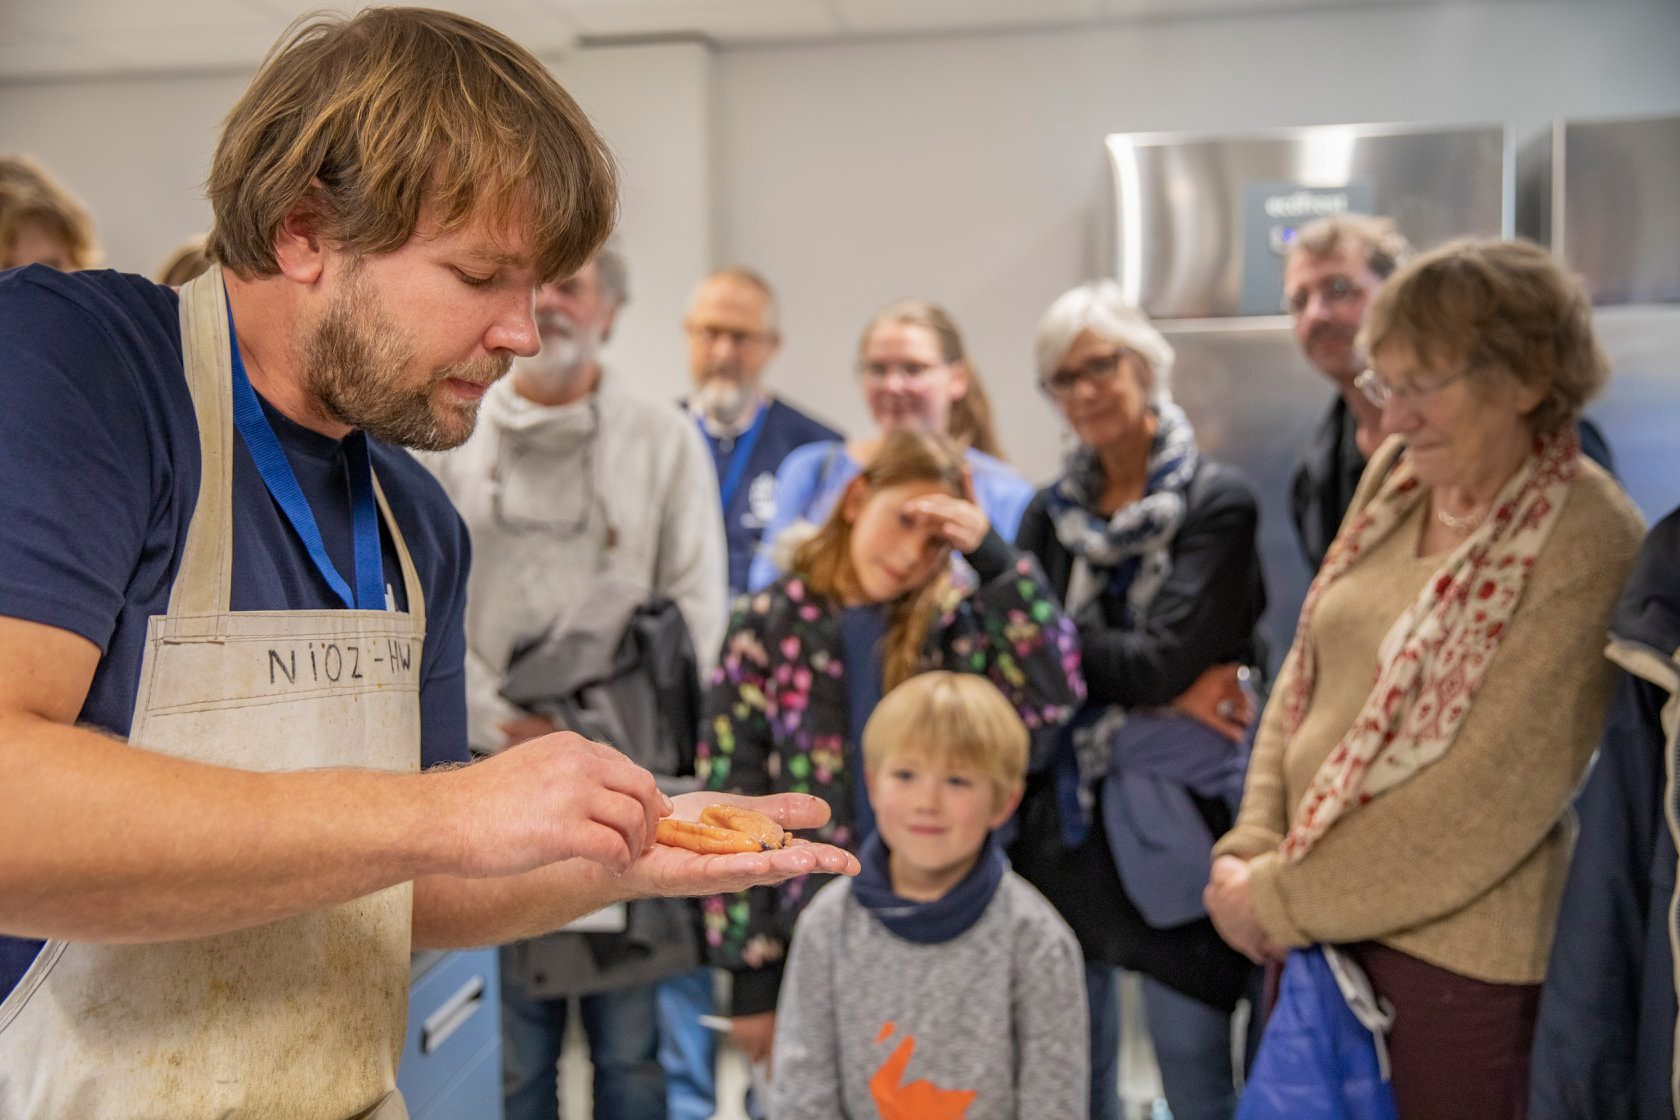 Fish dissection (Phycis blennoides) during NIOZ open day 2019